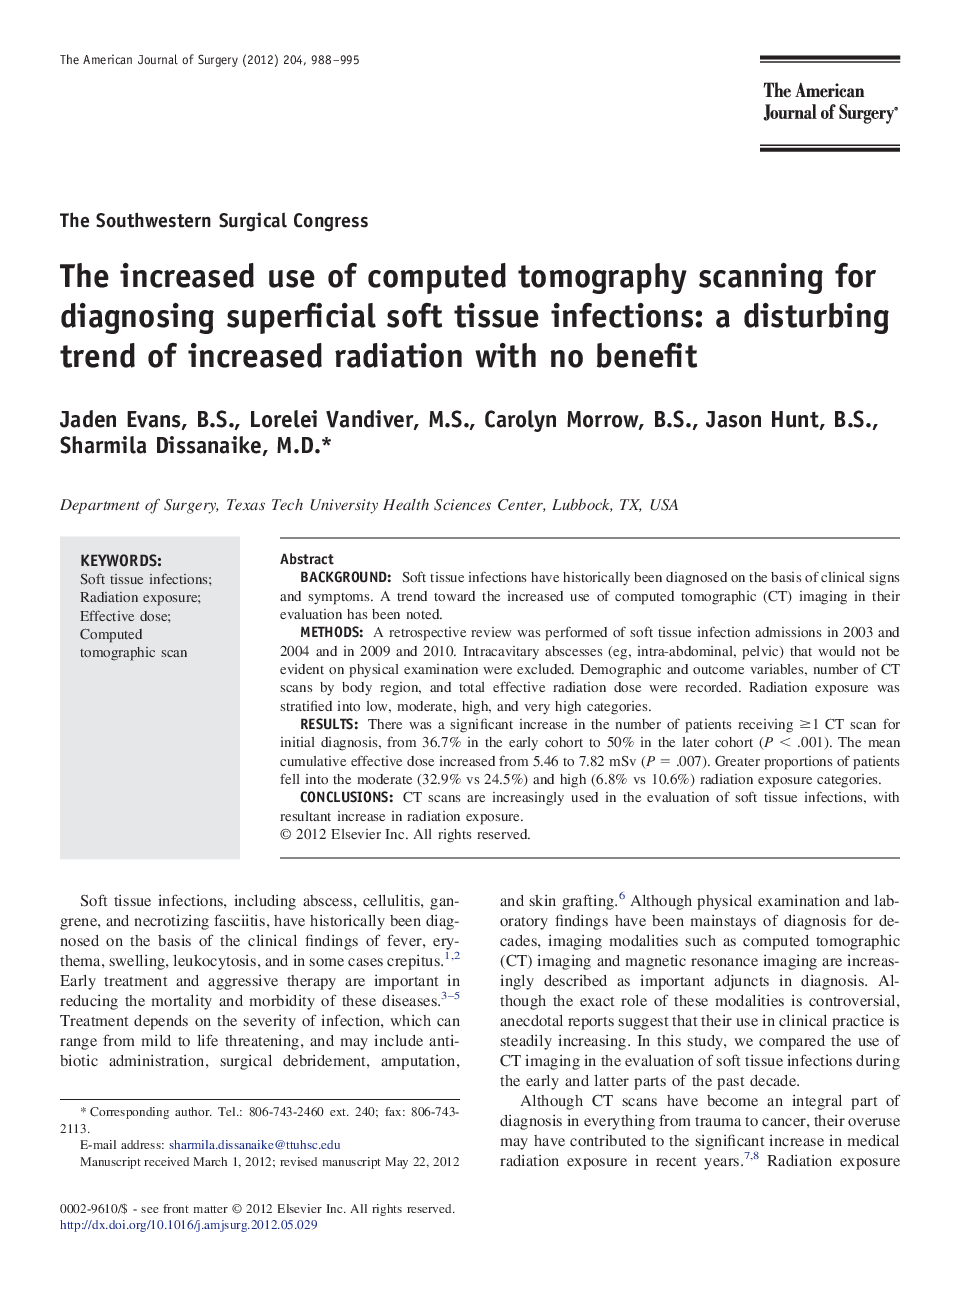 The increased use of computed tomography scanning for diagnosing superficial soft tissue infections: a disturbing trend of increased radiation with no benefit